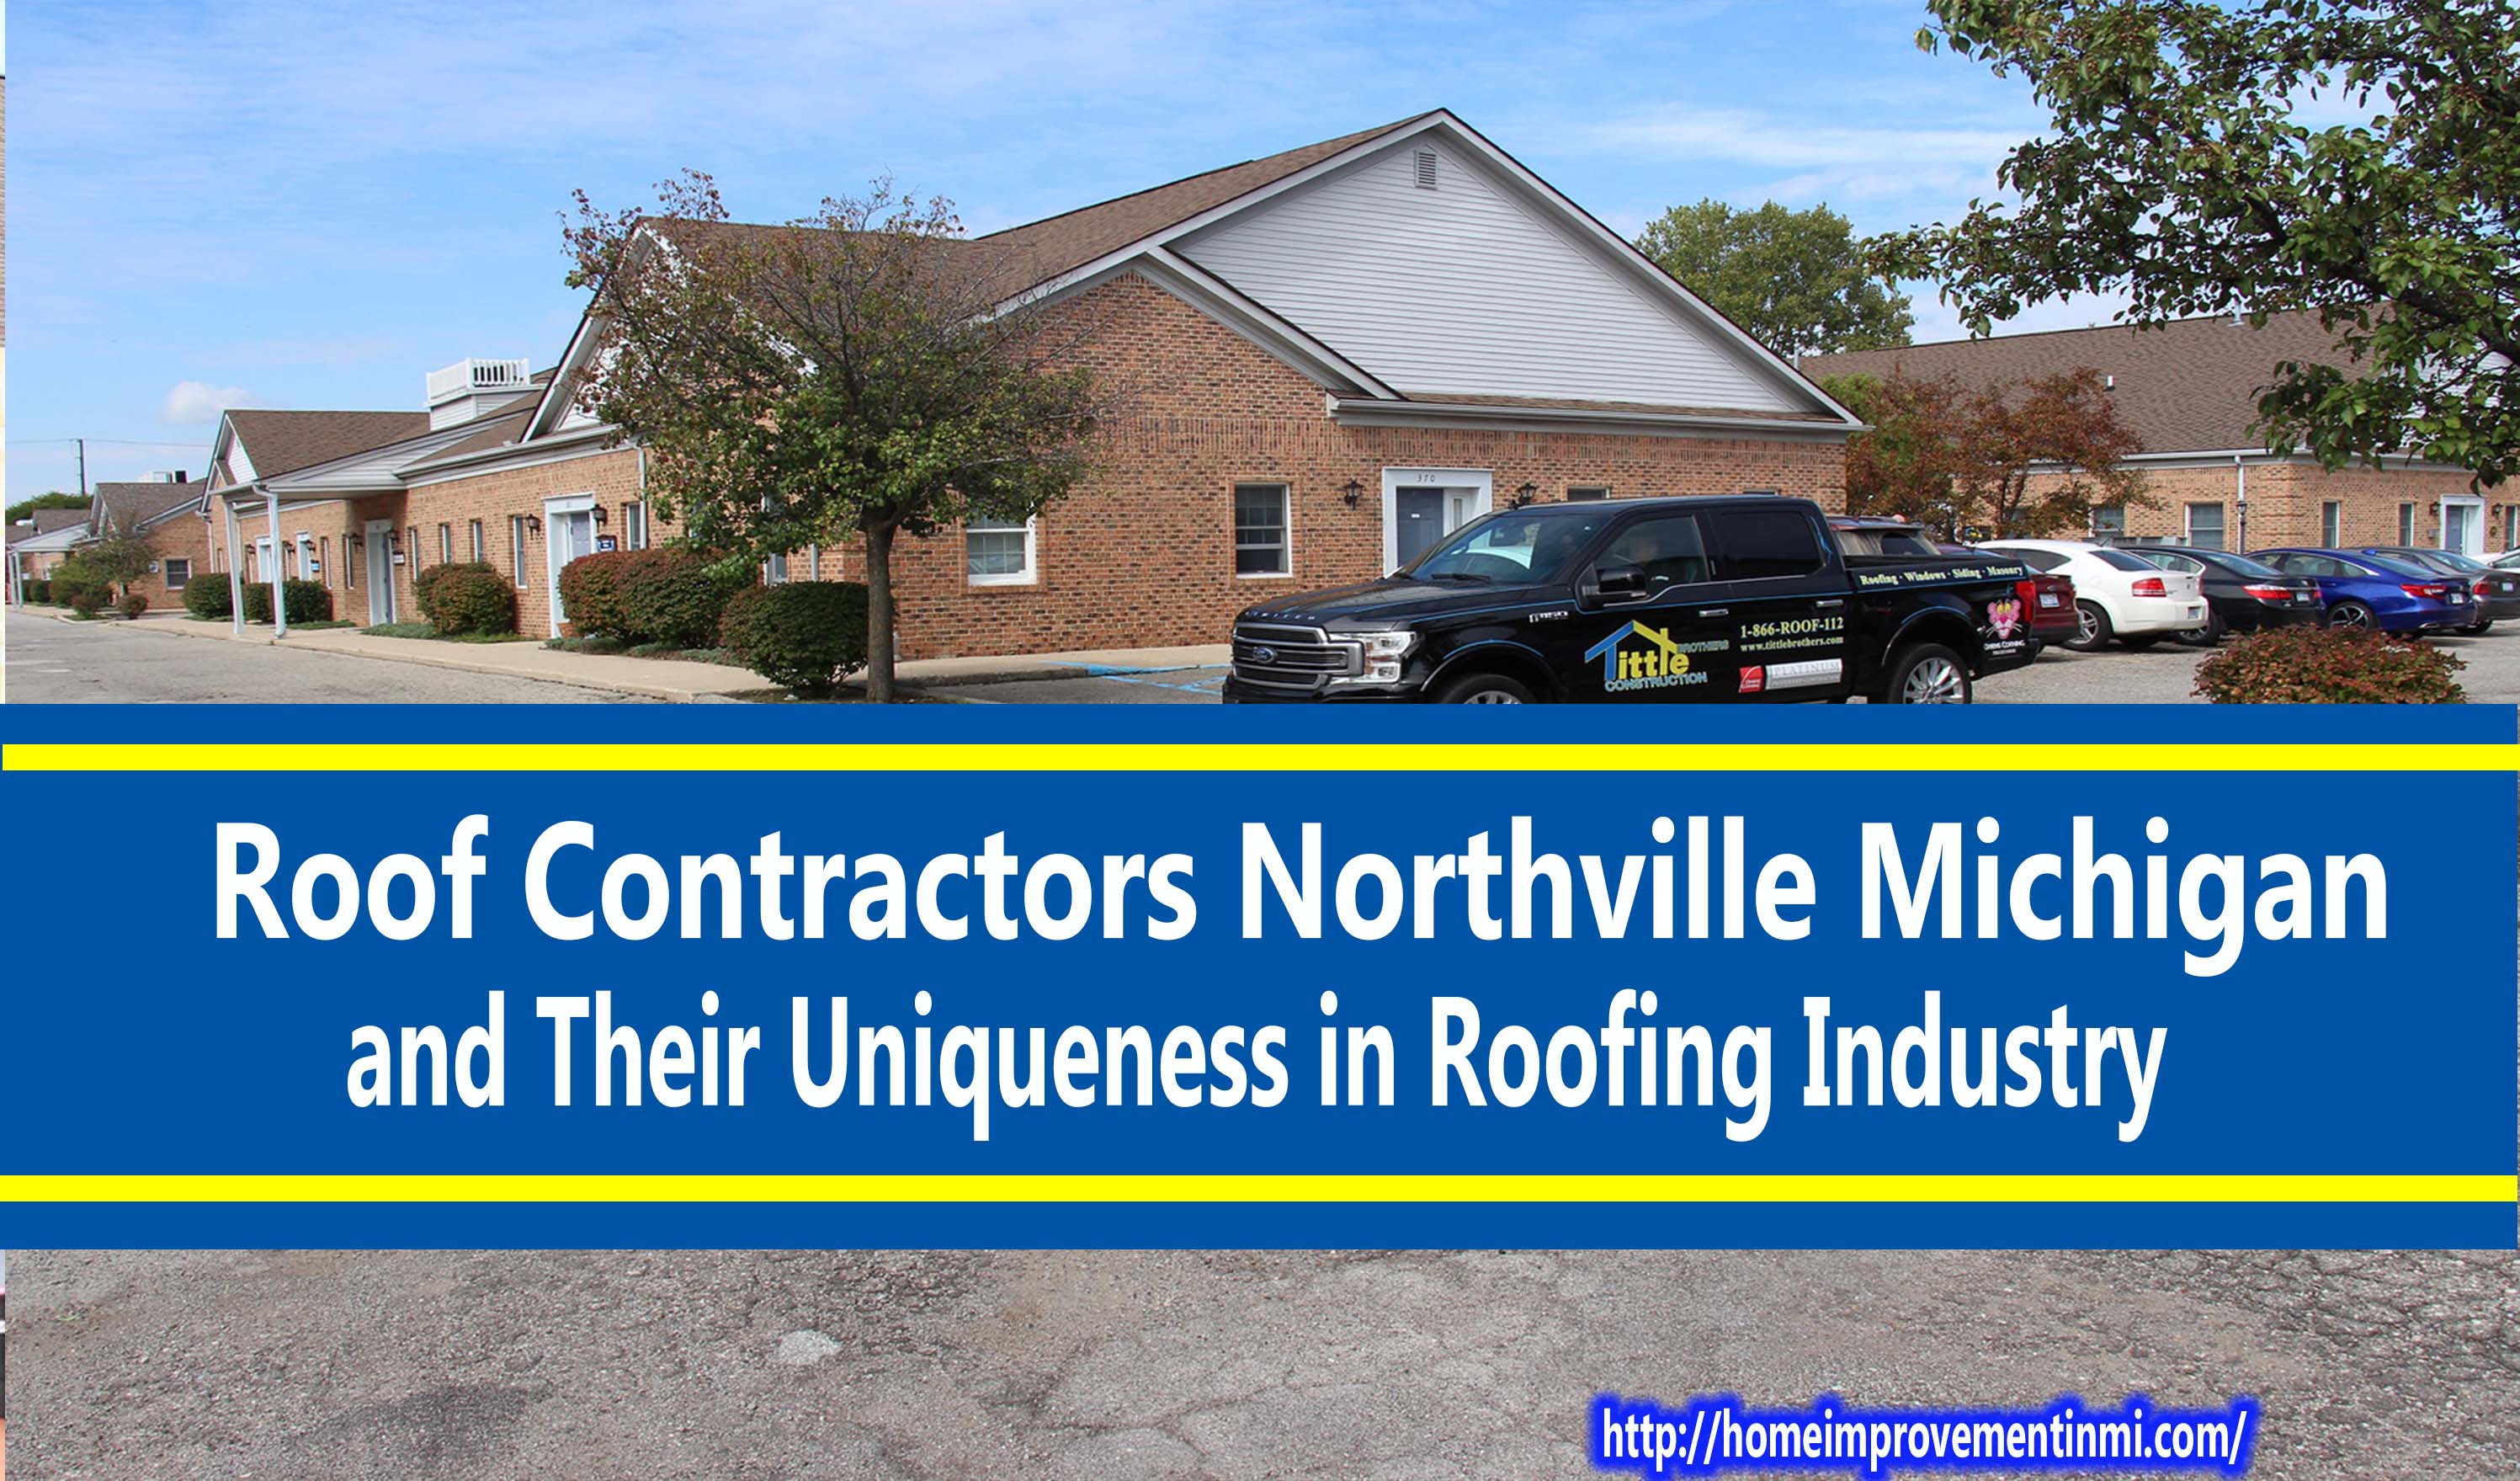 Roof Contractors Northville Michigan and Their Uniqueness in Roofing Industry